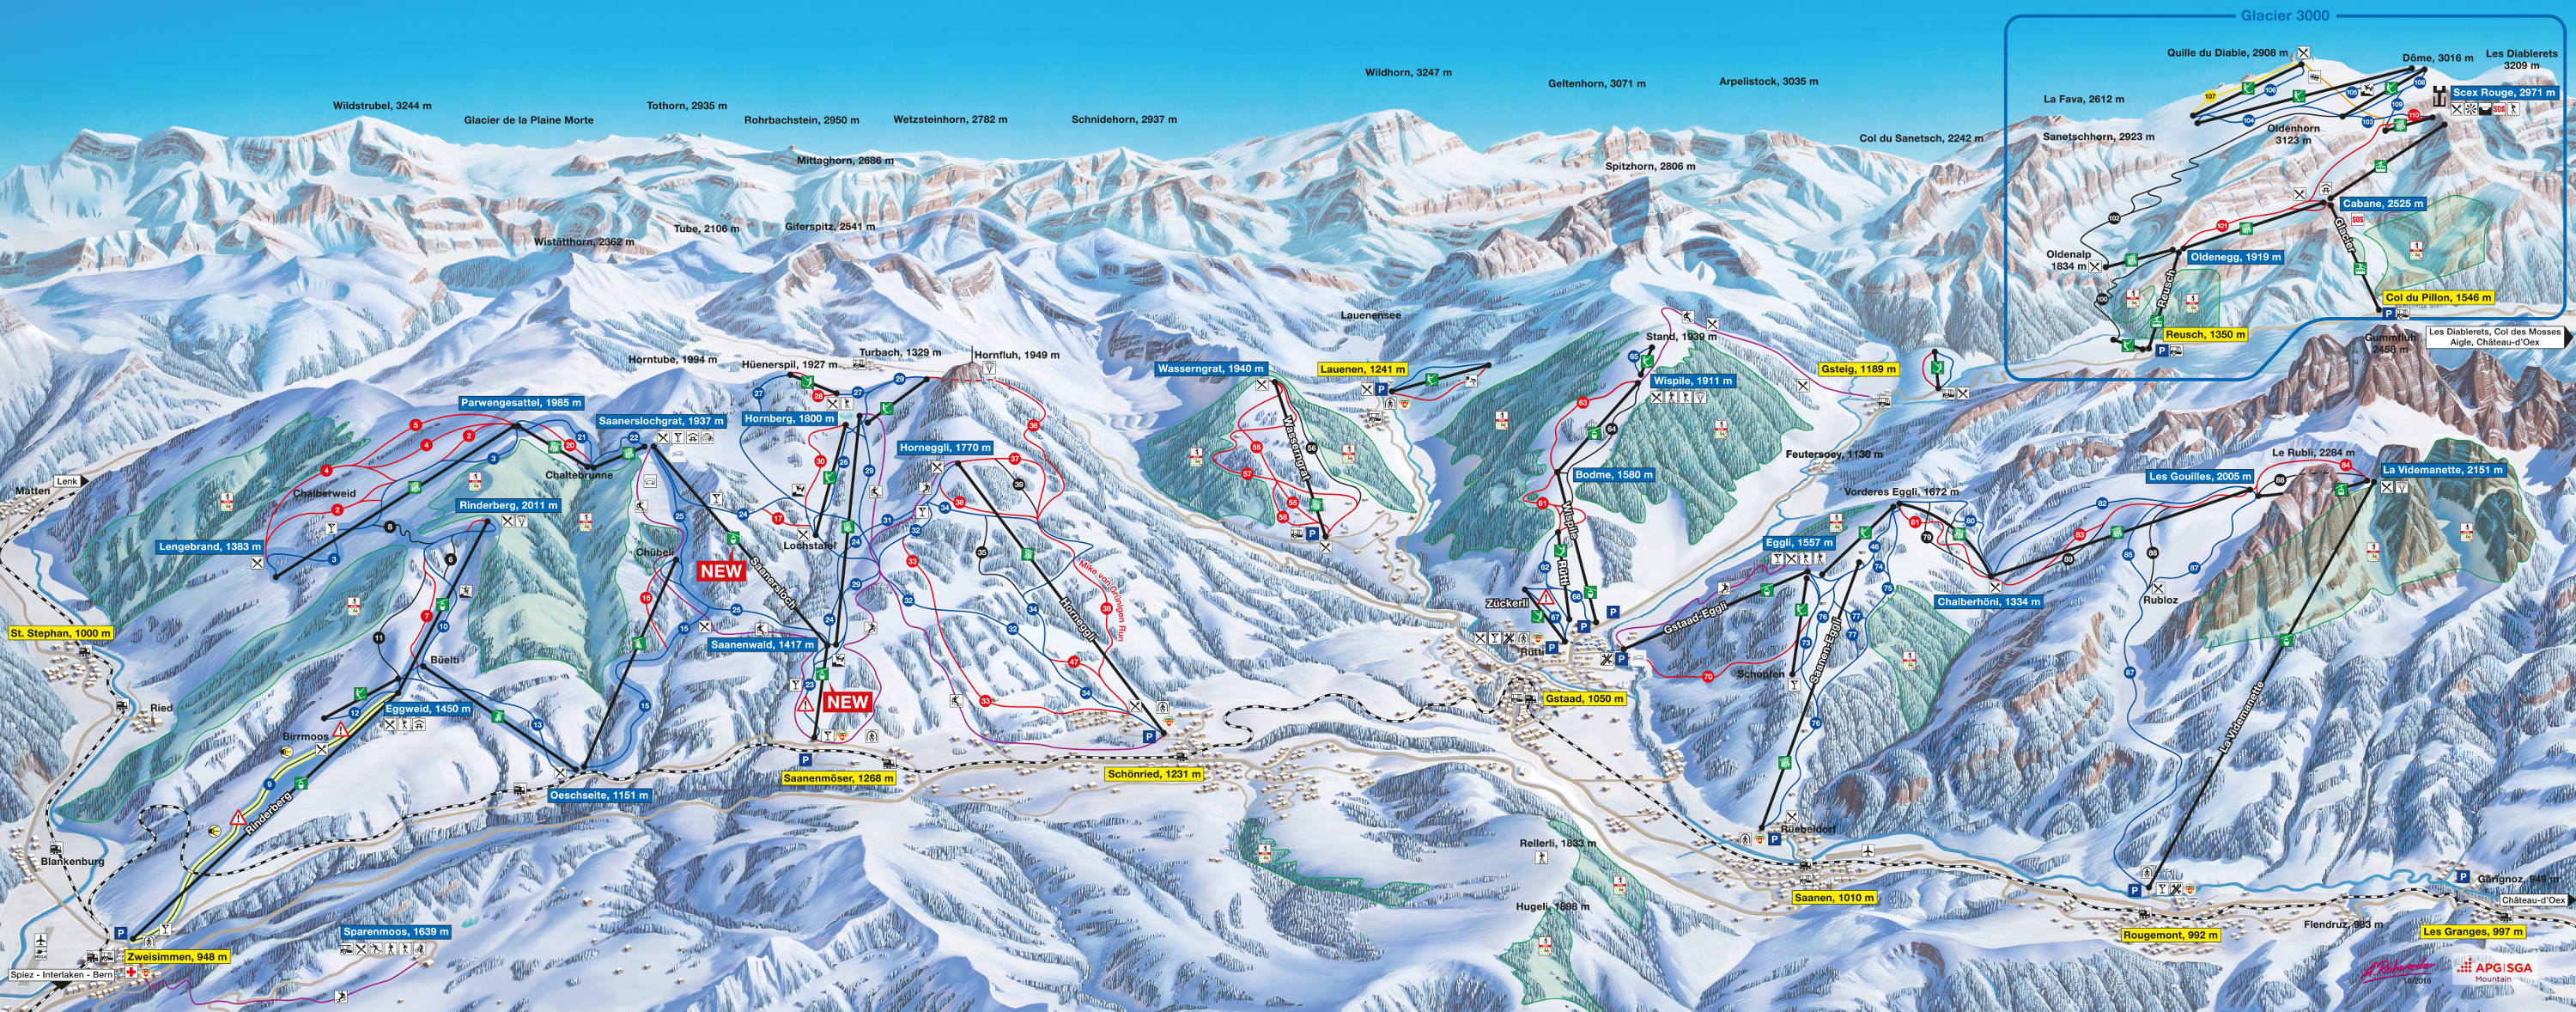 Gstaad Trail map